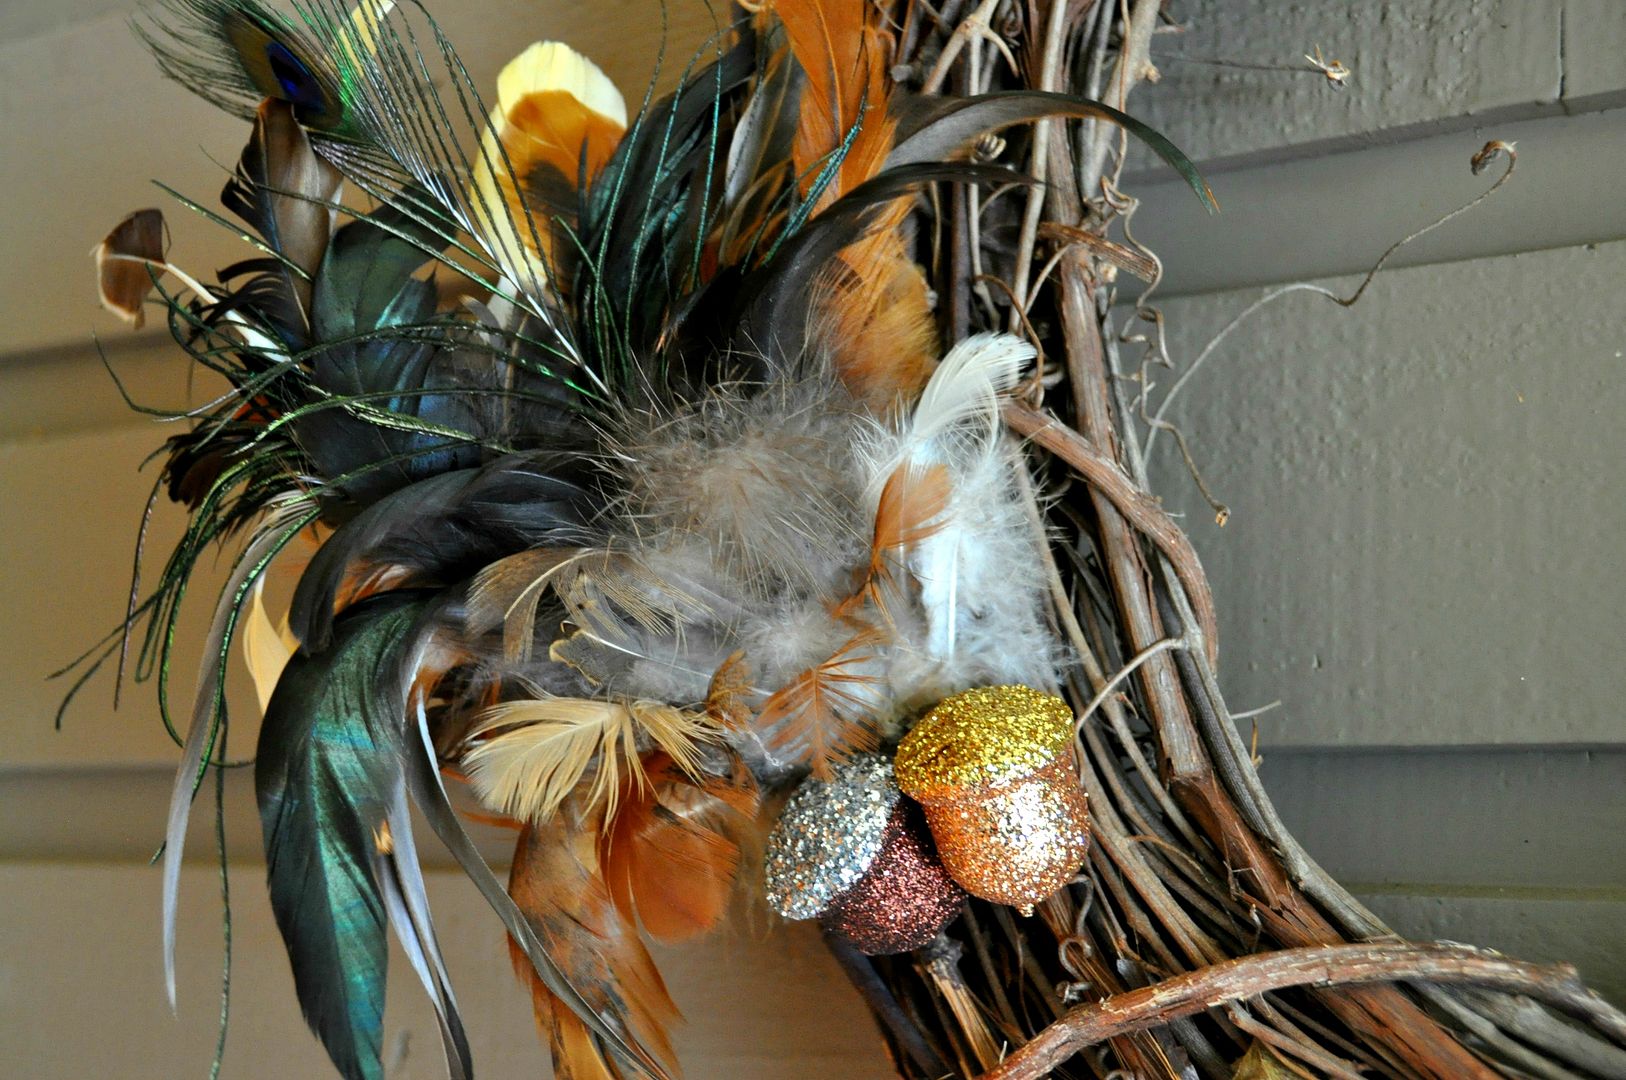 5-Minute Fall Wreath by Dolen Diaries | Mabey She Made It | #fall #autumn #wreath #falldecor #easywreath #feathers